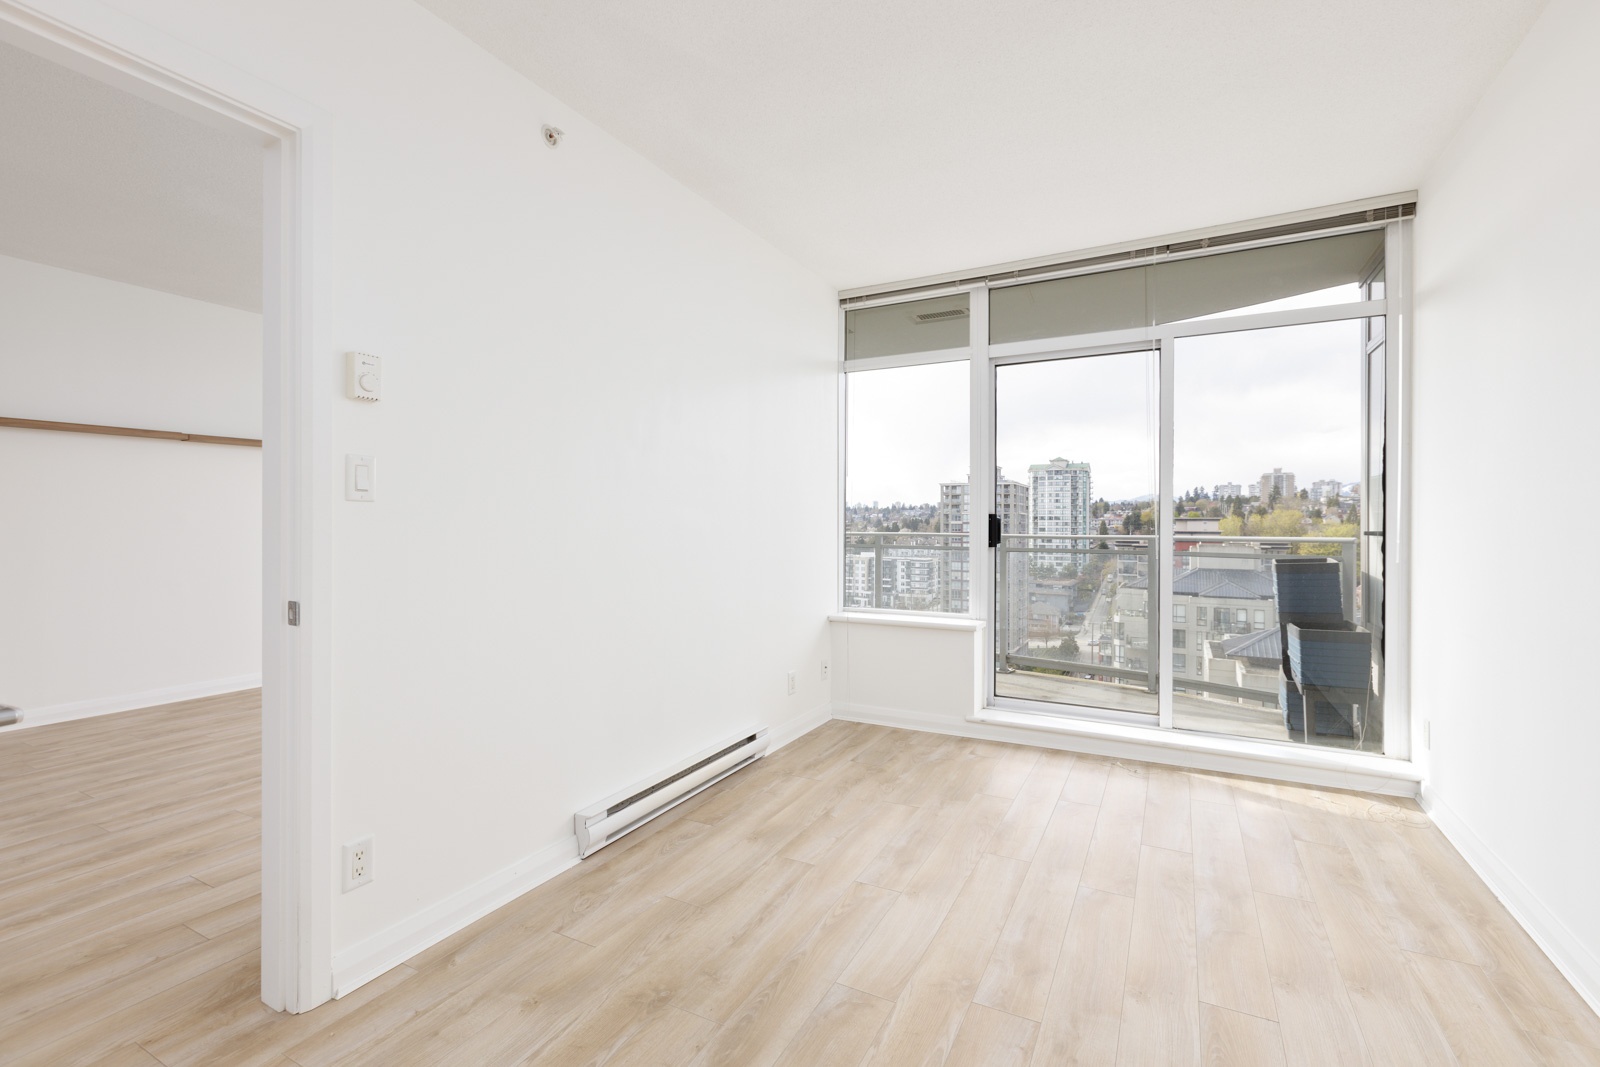 bedroom with white wall and light wood flooring. large floor to ceiling windows with balcony door